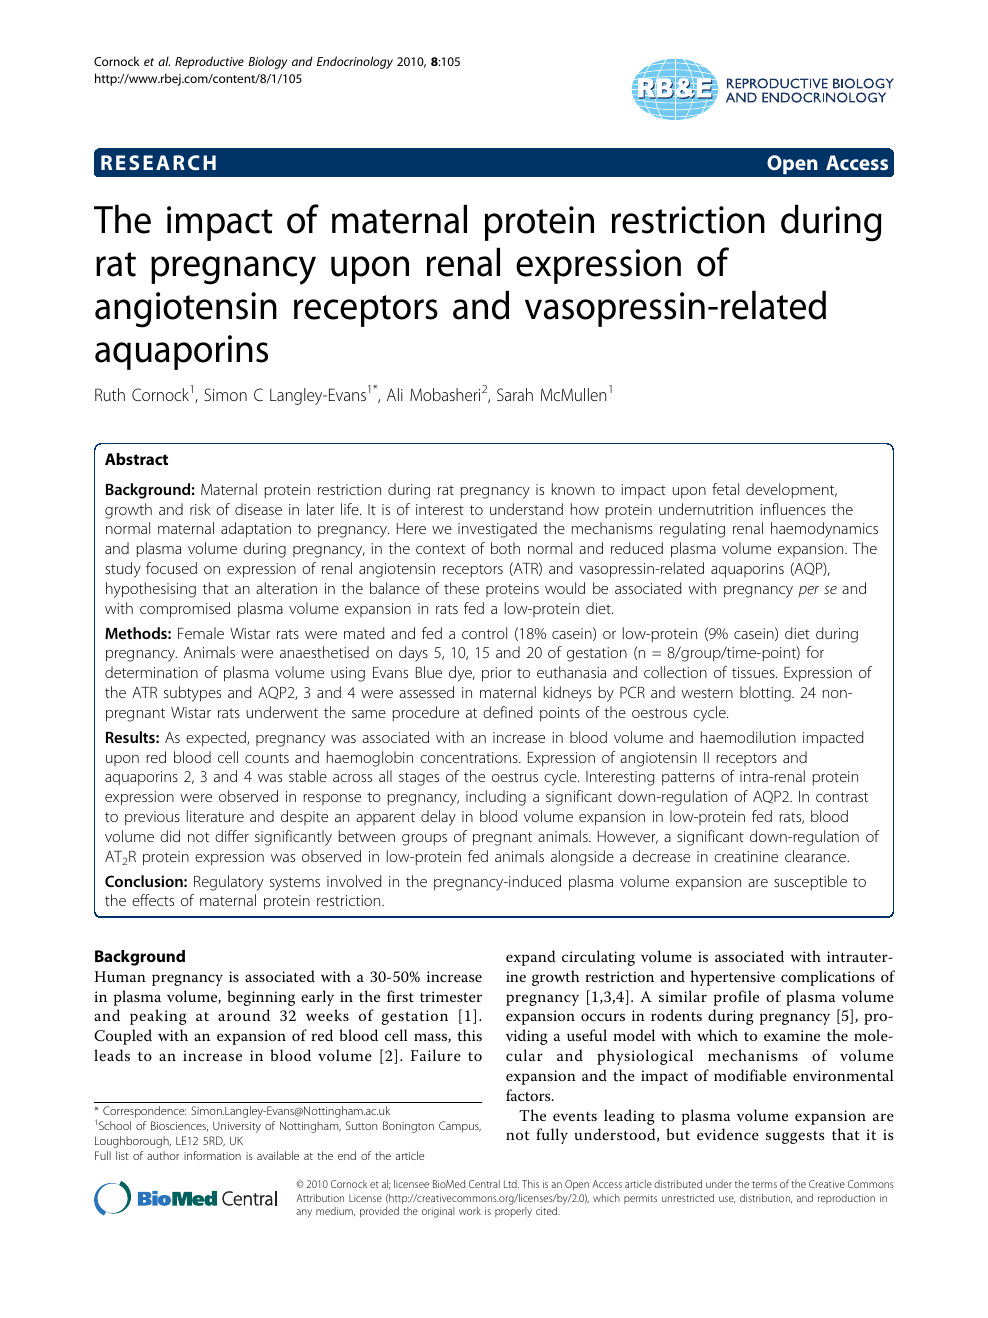 The Impact Of Maternal Protein Restriction During Rat Pregnancy Upon Renal Expression Of Angiotensin Receptors And Vasopressin Related Aquaporins Topic Of Research Paper In Veterinary Science Download Scholarly Article Pdf And Read